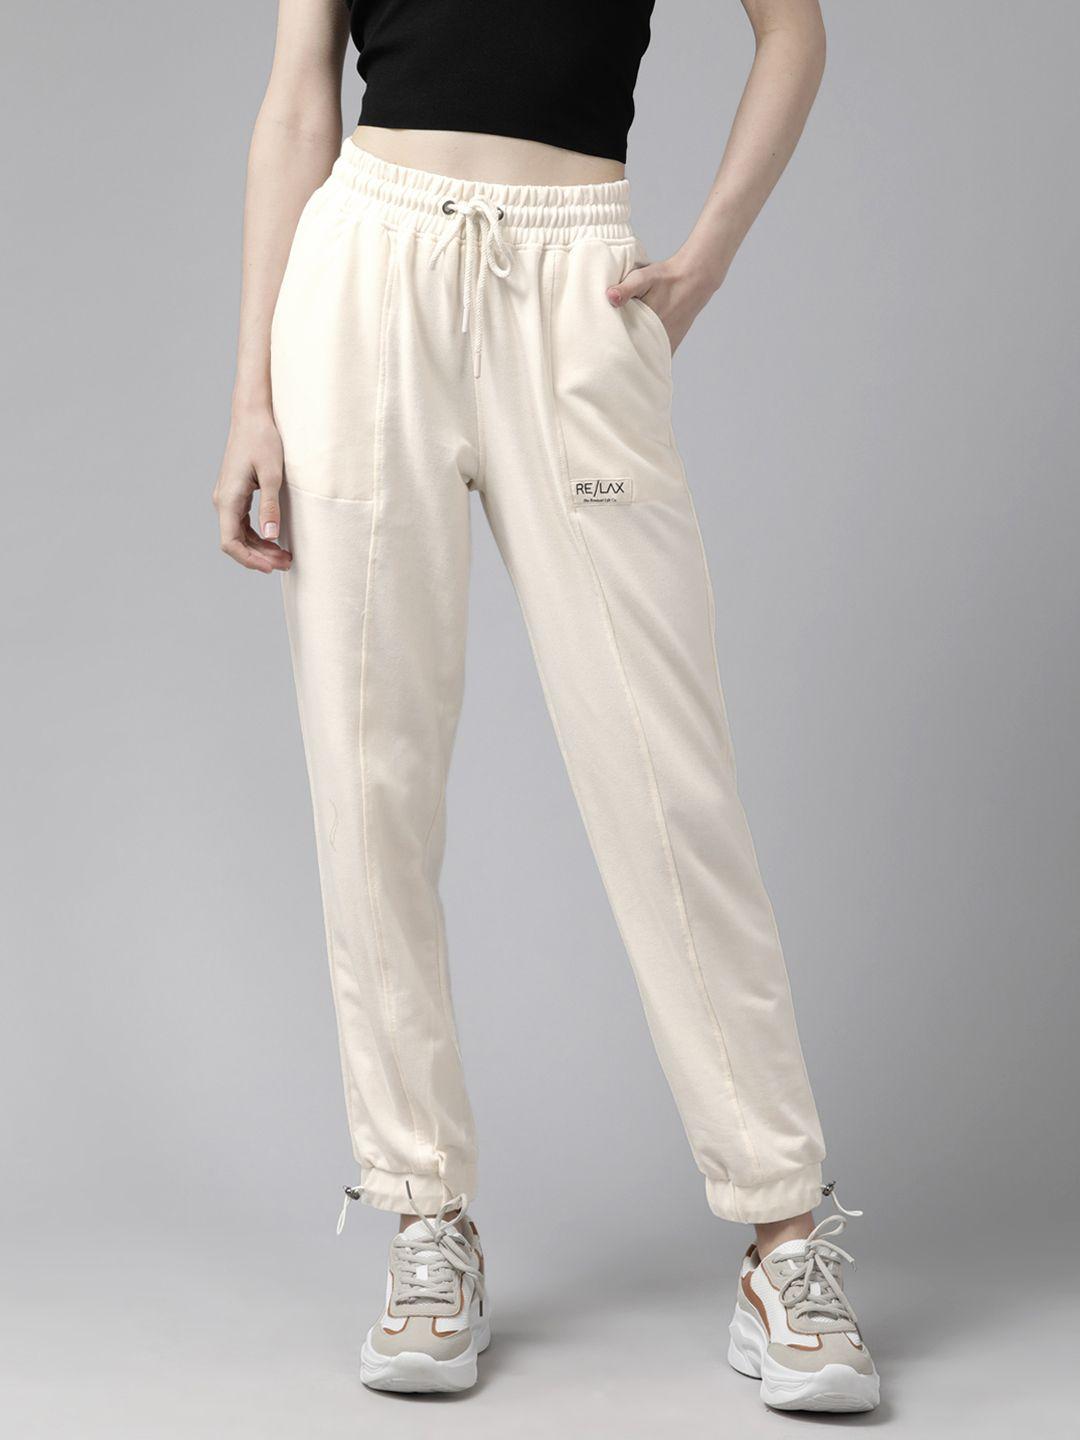 the roadster lifestyle co. women regular fit joggers